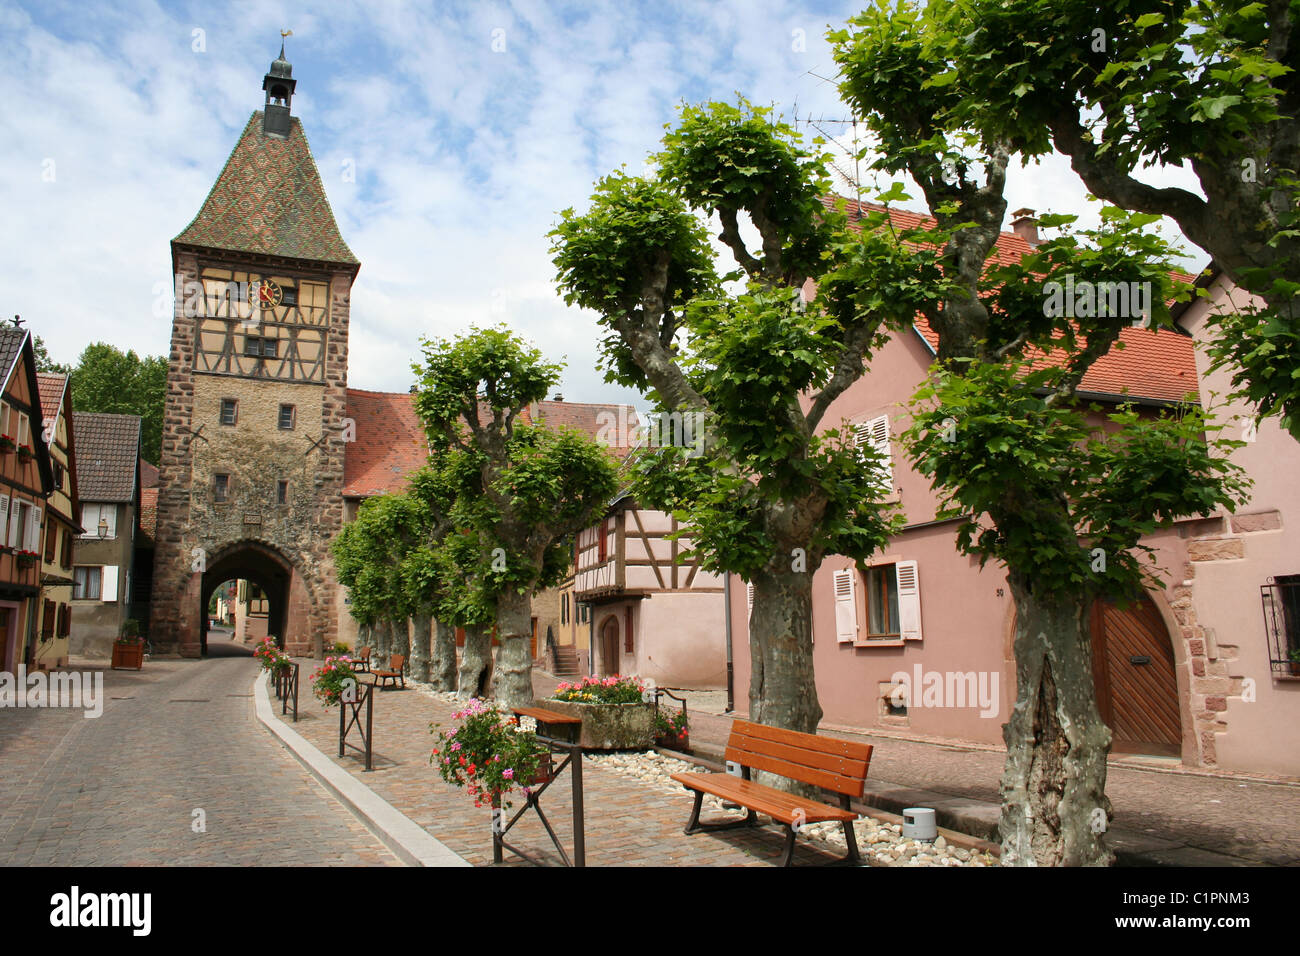 France. Ancient bell tower in the Alsace region, France. Shows its historical location on the west bank of the Upper Rhine. Stock Photo